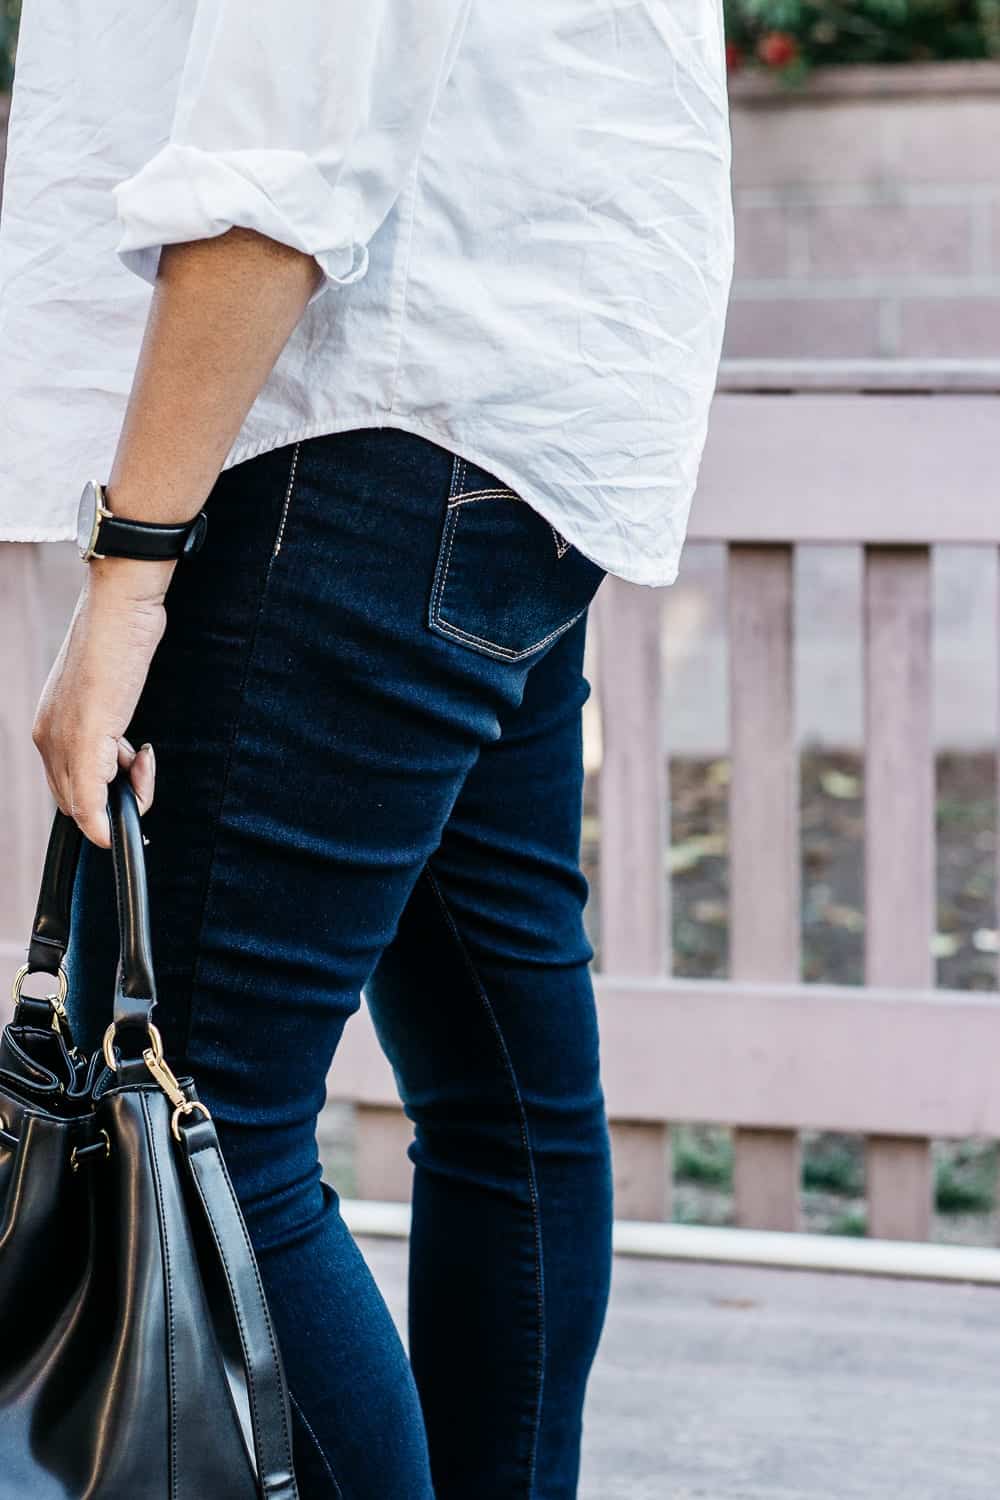 Spring Style in Levi's 711 Skinny Jeans - Hot Beauty Health